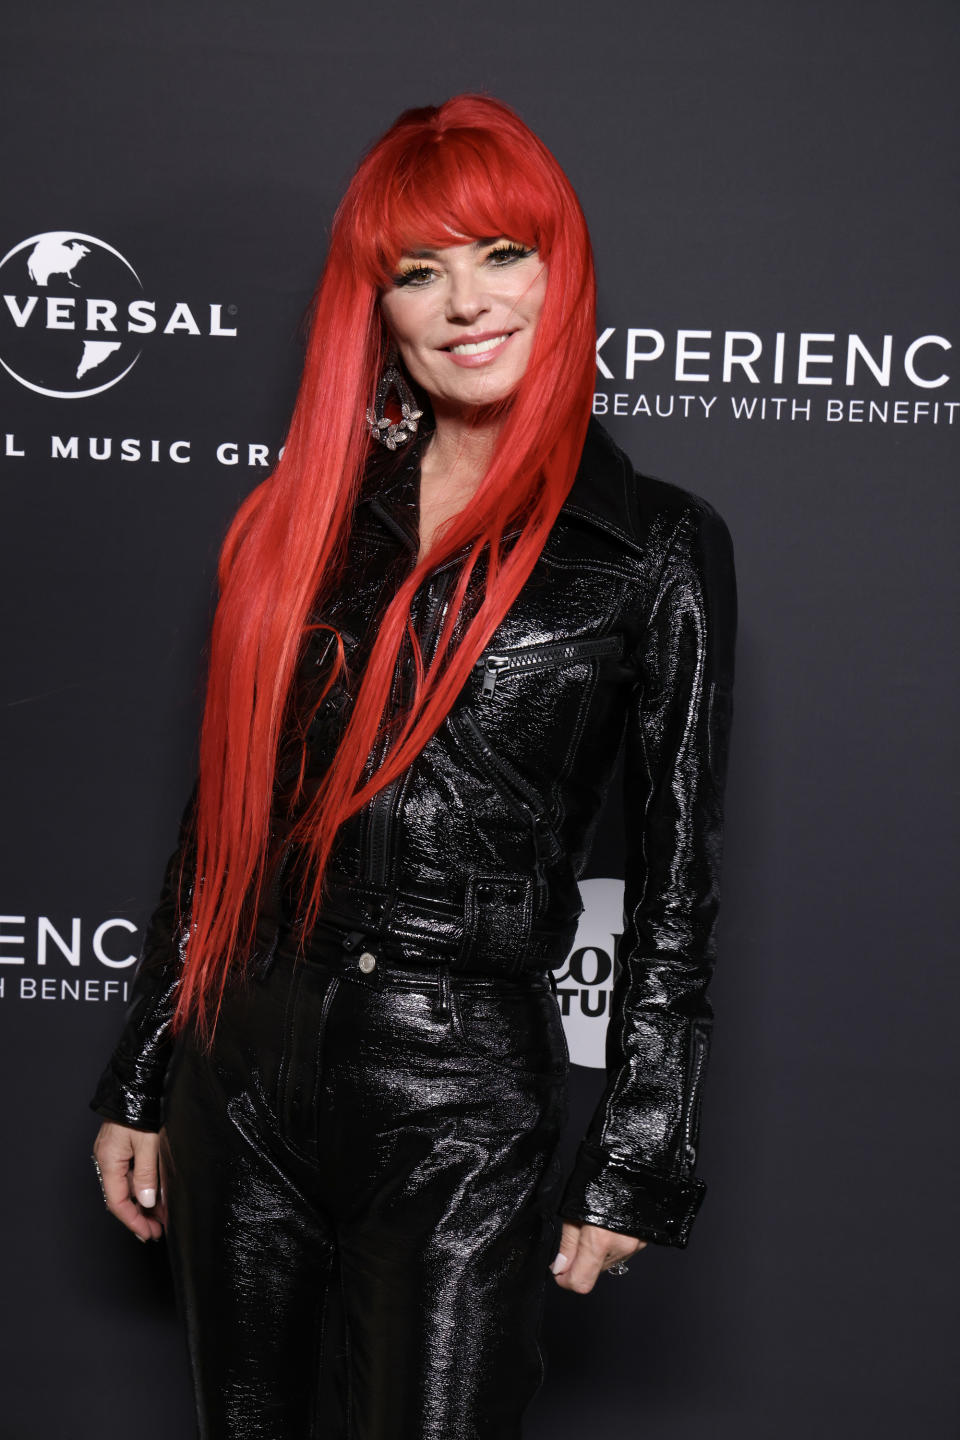 LOS ANGELES, CALIFORNIA - FEBRUARY 05: Shania Twain attends Universal Music Group's 2023 GRAMMYS after party celebration at Milk Studios Los Angeles on February 05, 2023 in Los Angeles, California. (Photo by Rodin Eckenroth/Getty Images)